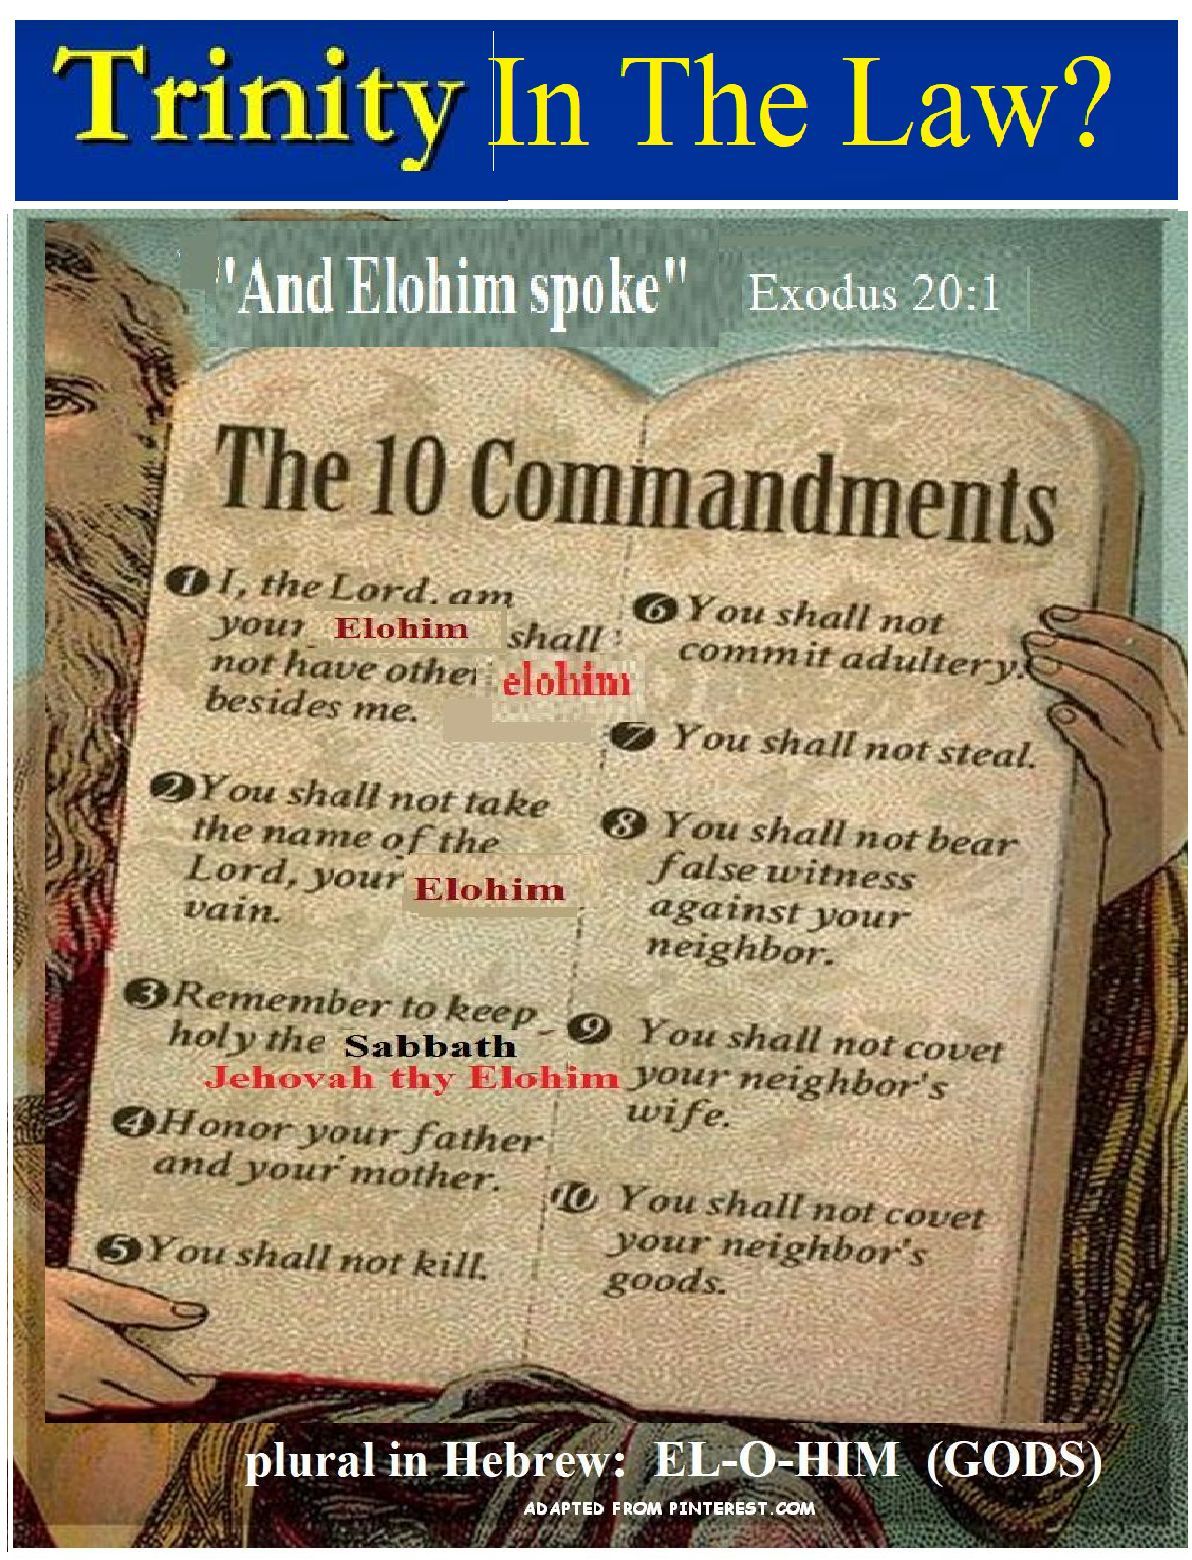 image of summary of 10 commandments with plural .